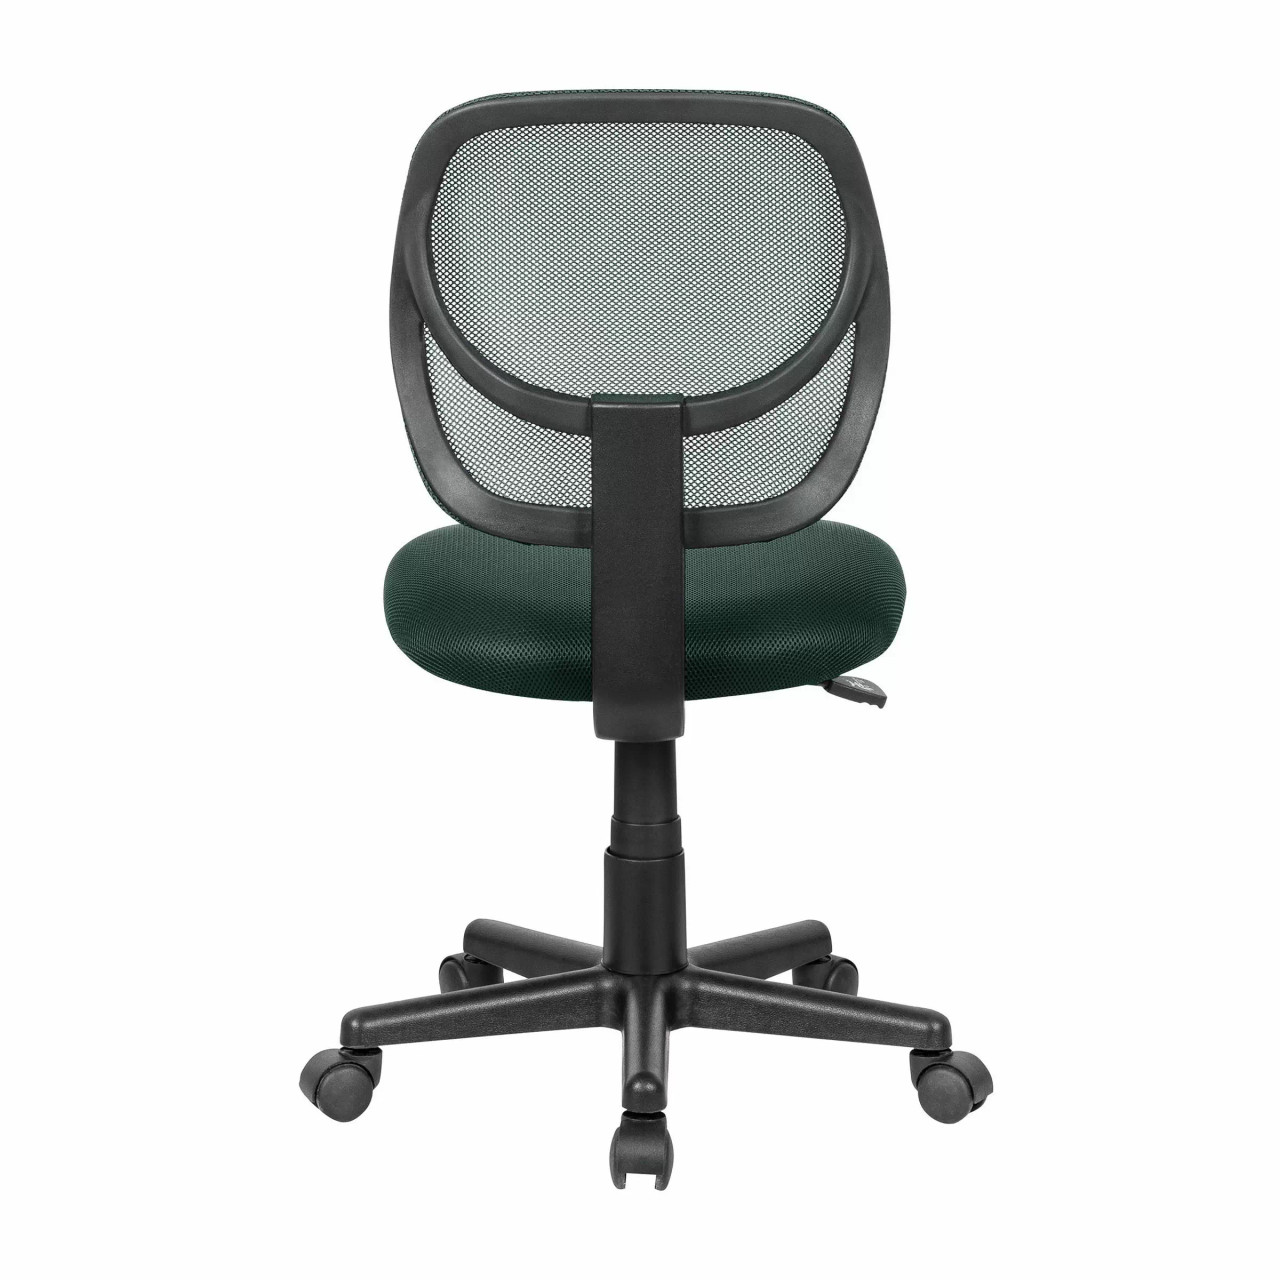 496-1001, Green Bay, GB, Packers. Armless, Desk, Task, Chair, FREE SHIPPING, NFL, Imperial